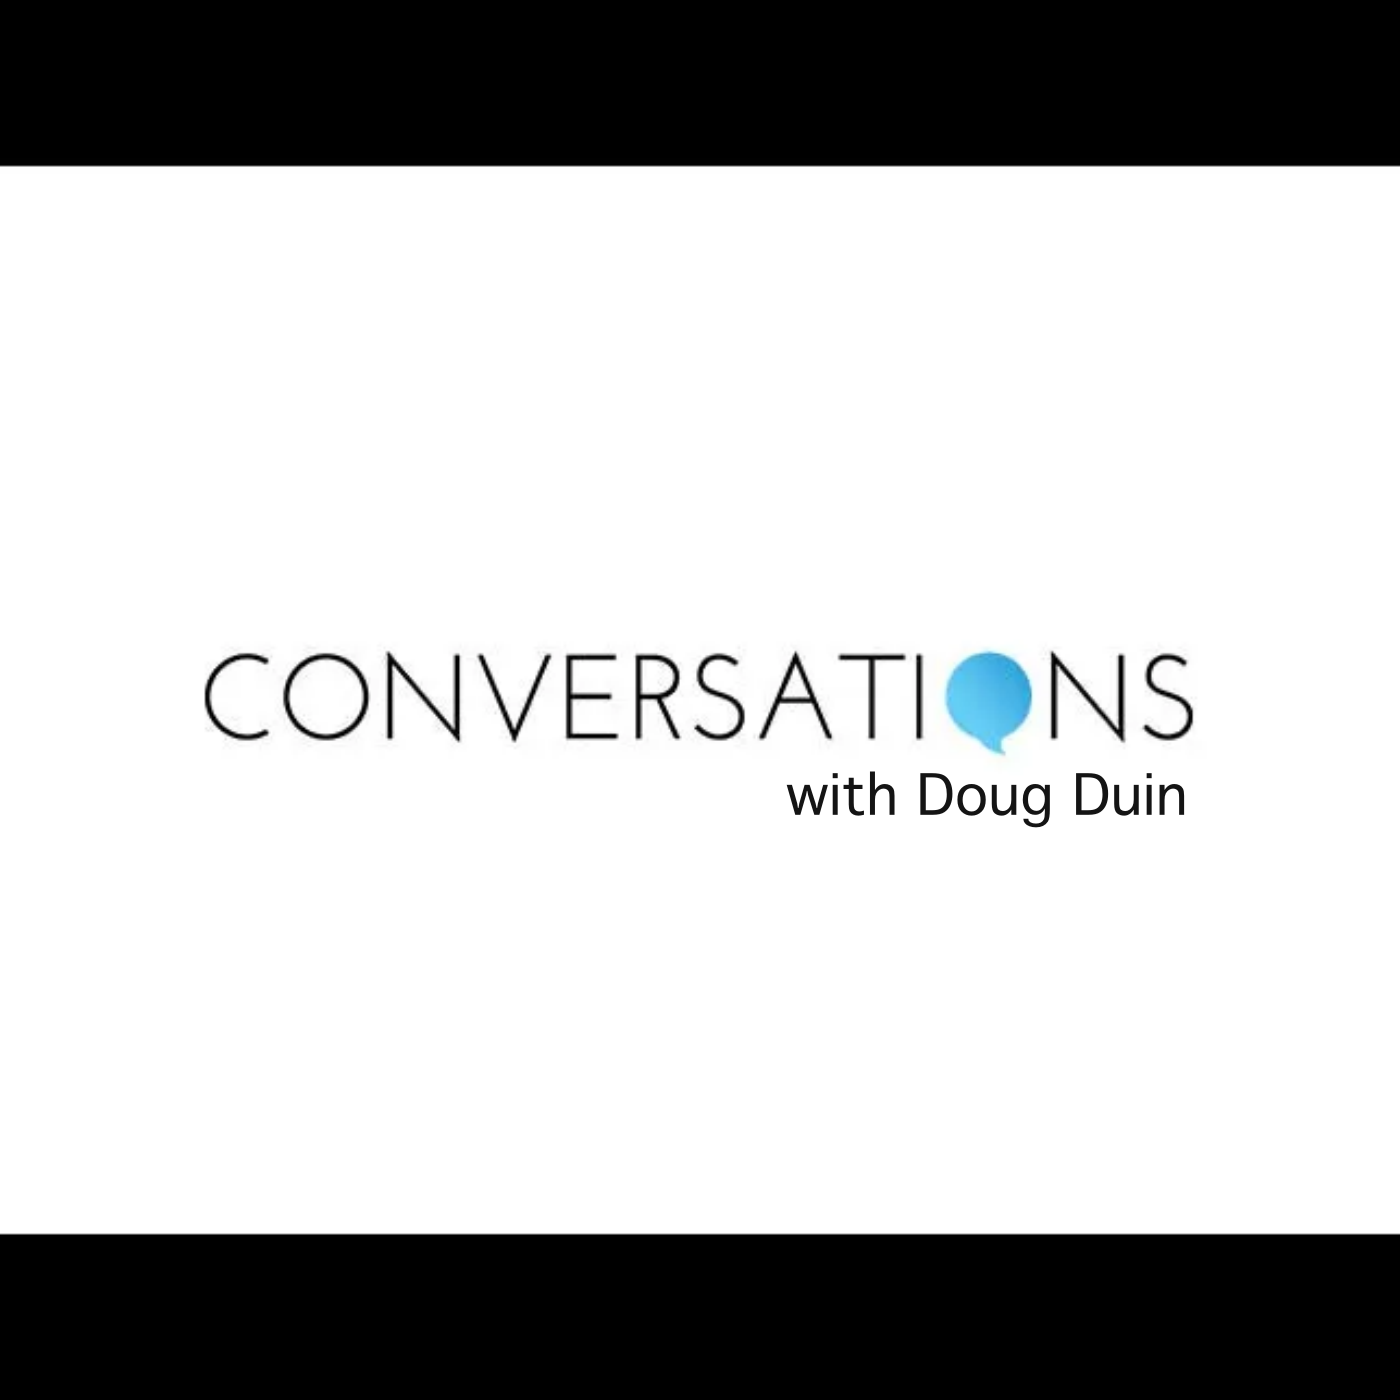 Conversations with Doug Duin